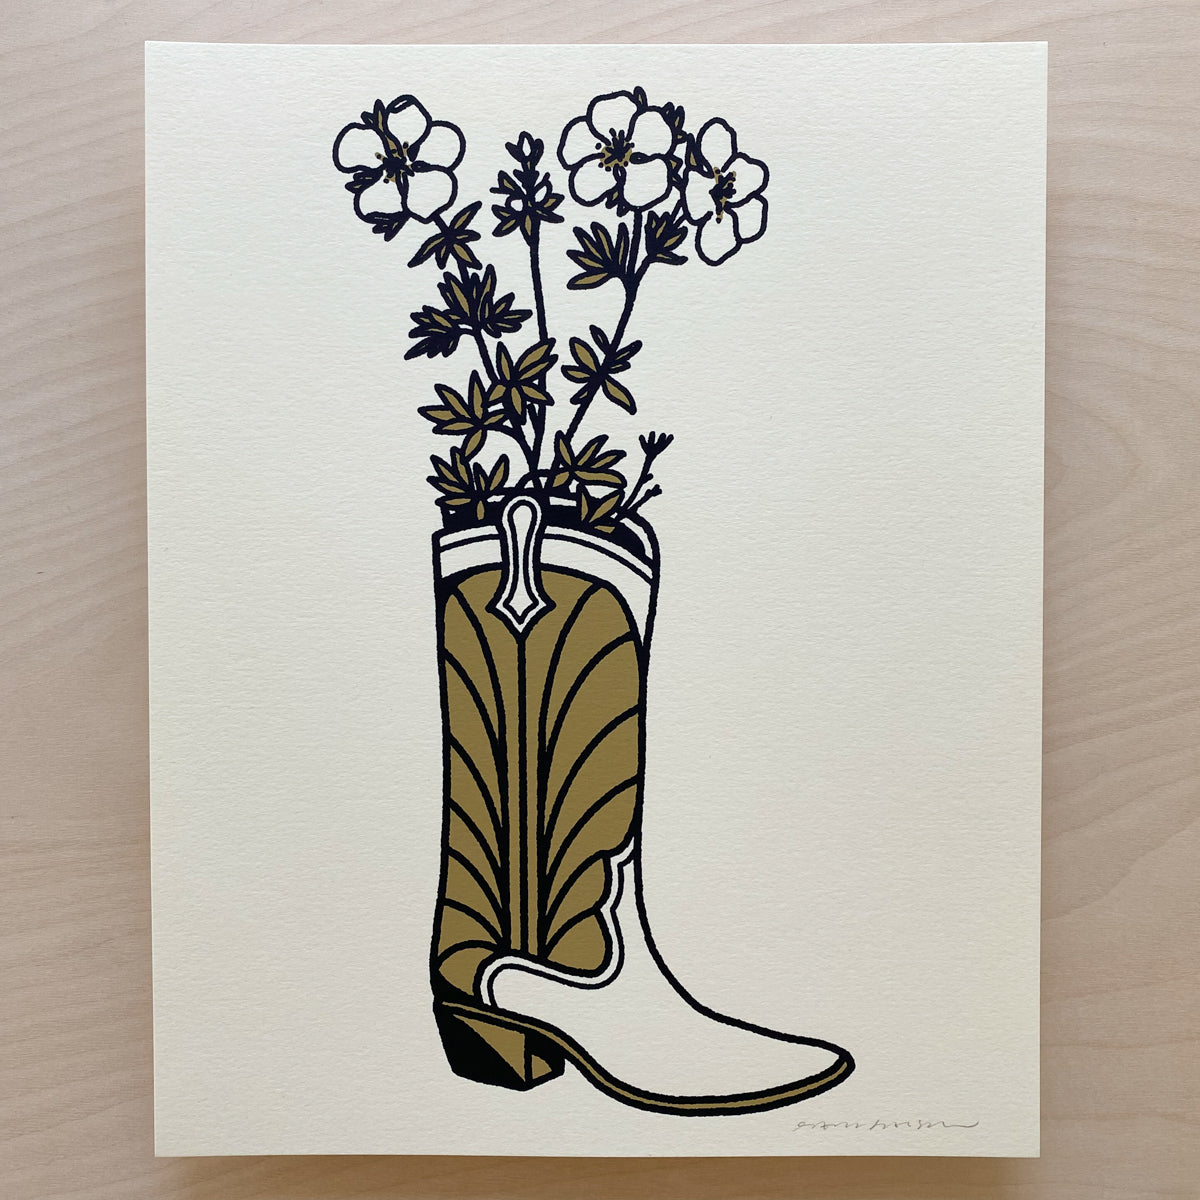 Mountain Flower Boot - Signed 8x10in Print #282